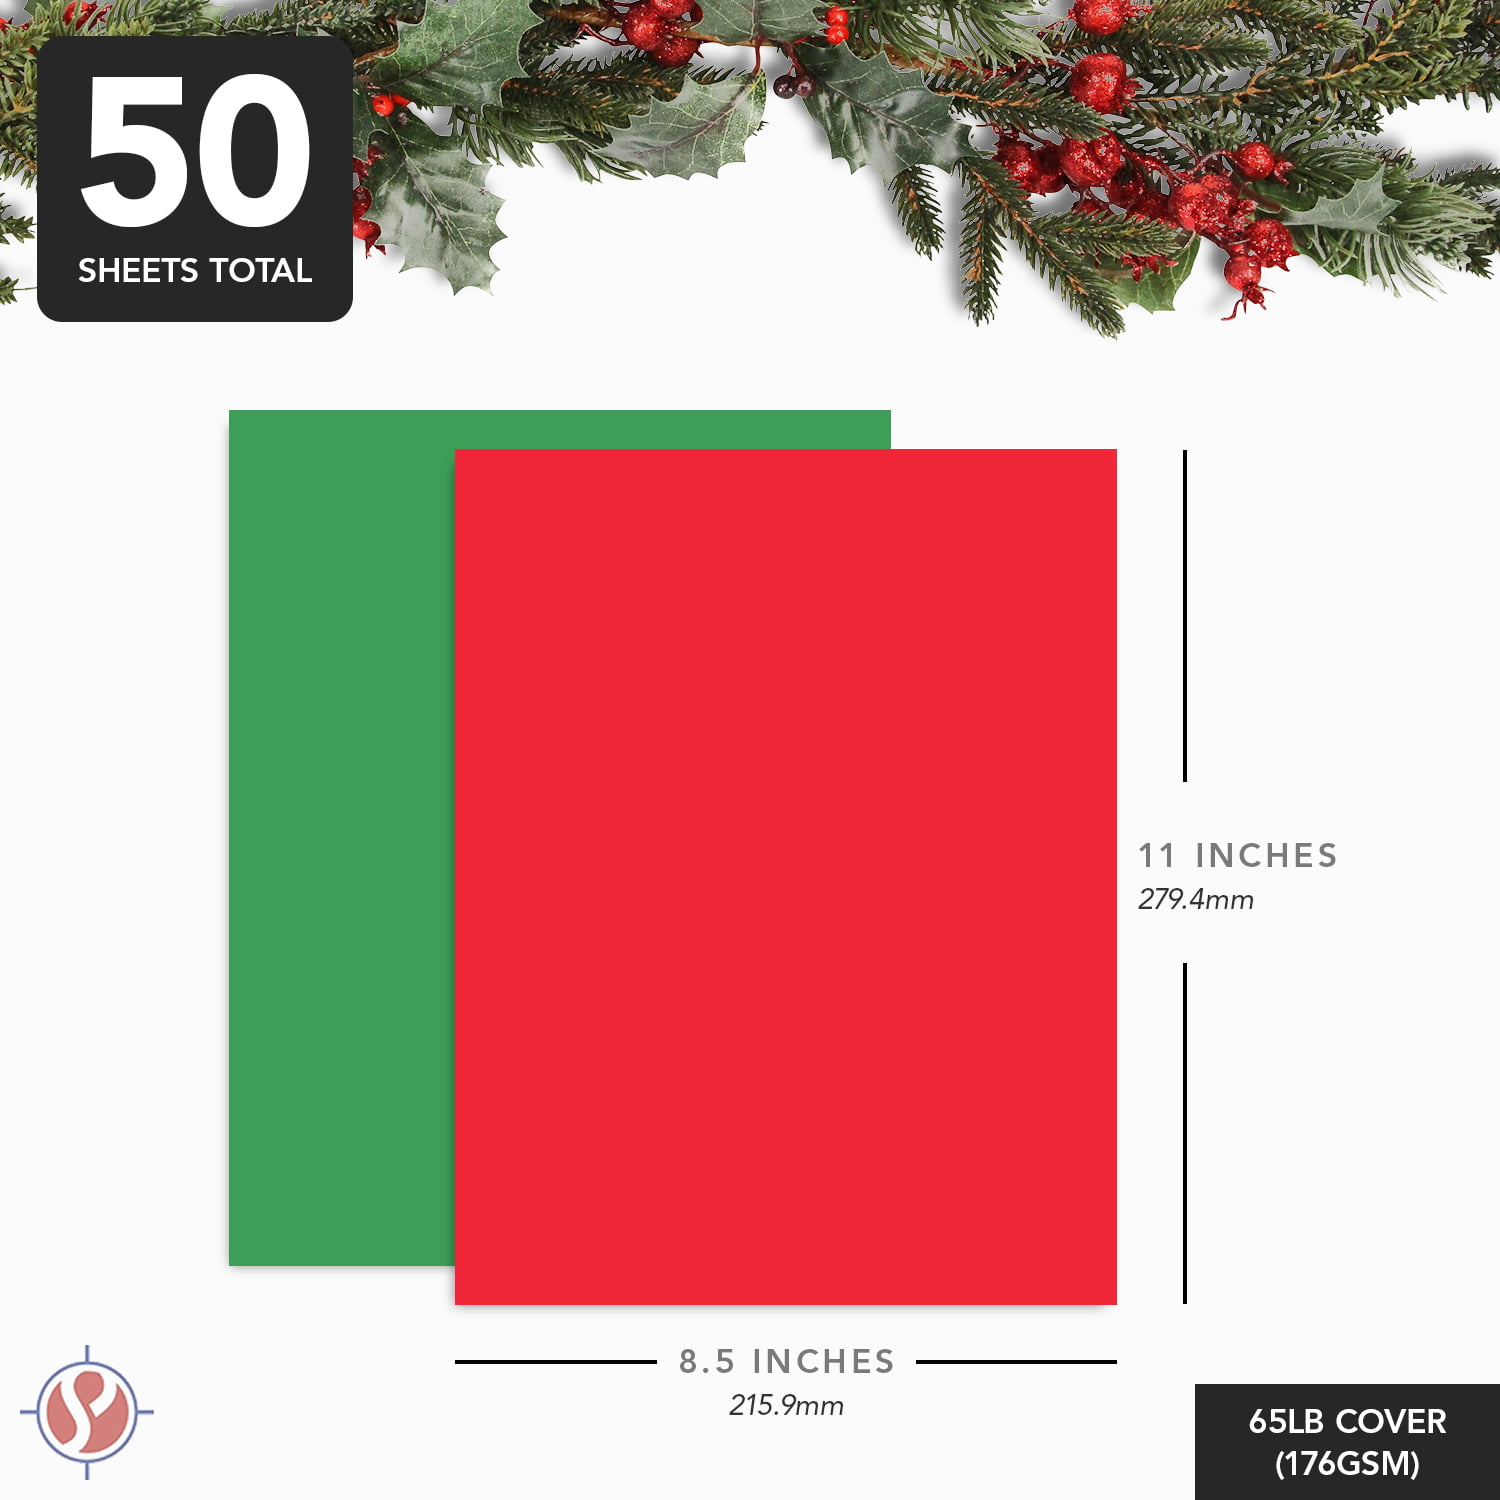  Red 8.5'' x 11''Cardstock Paper,250gsm/92bl Thick  Paper-25sheet Premium Red Construction Paper,Double Sided Printer Paper,for  Christmas Cards,Craft,Invitations,Scrapbook Supplie(Christmas Red) : Arts,  Crafts & Sewing